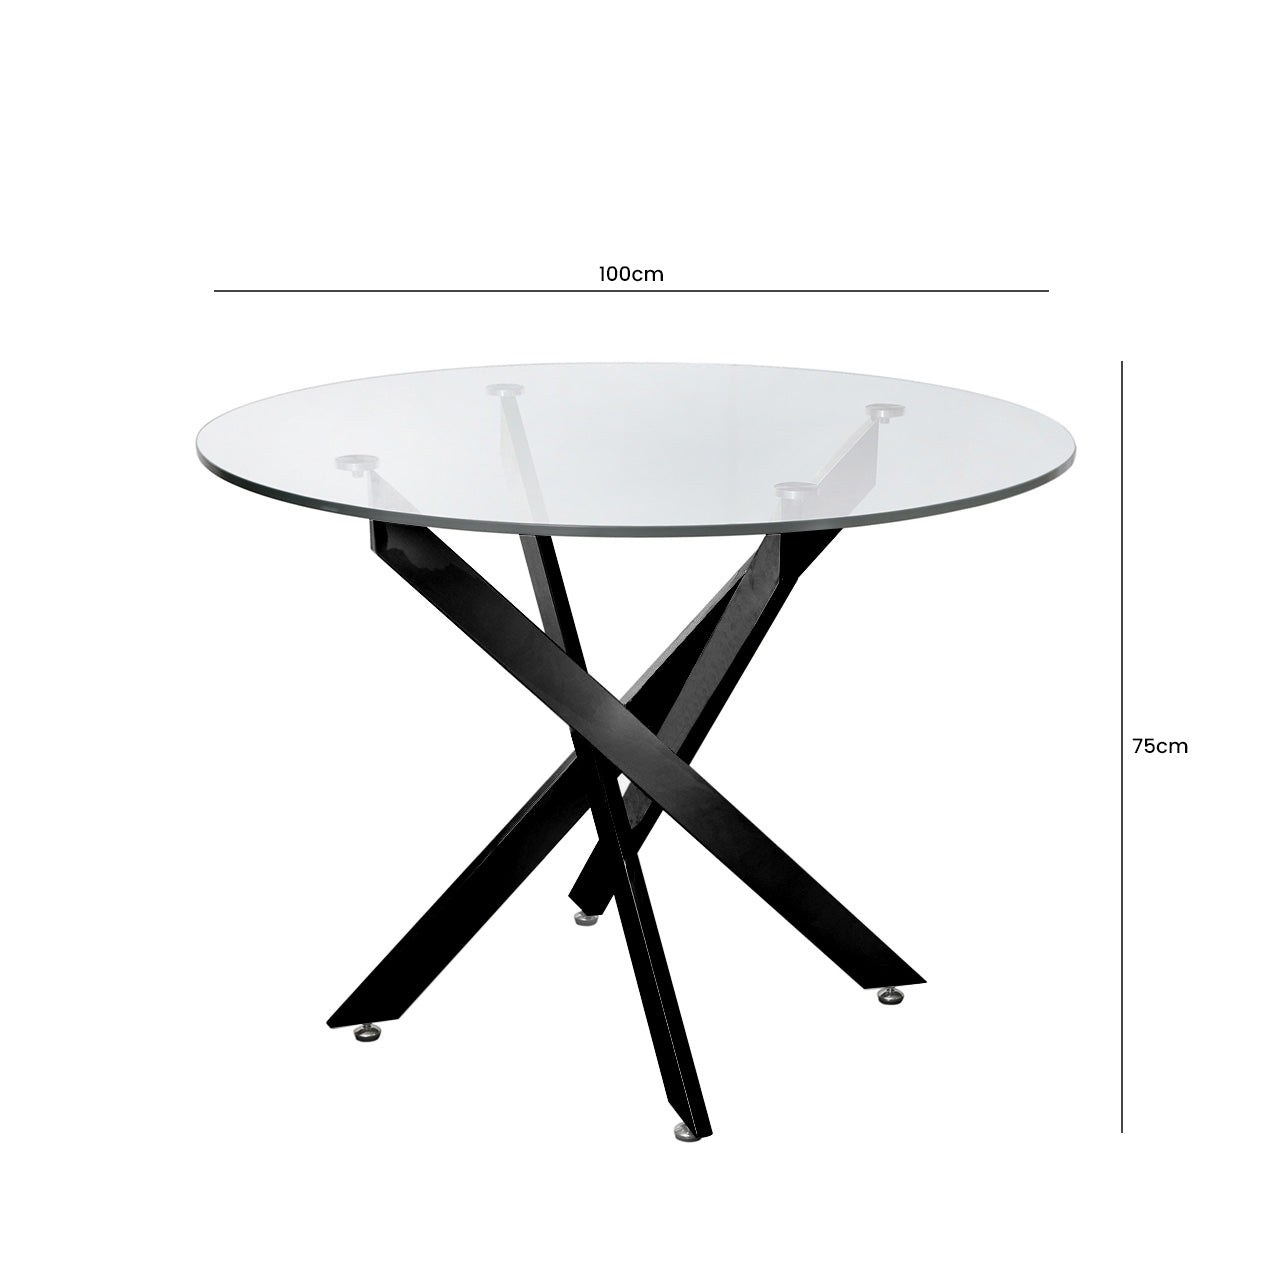 round black glass dining table in Dubai